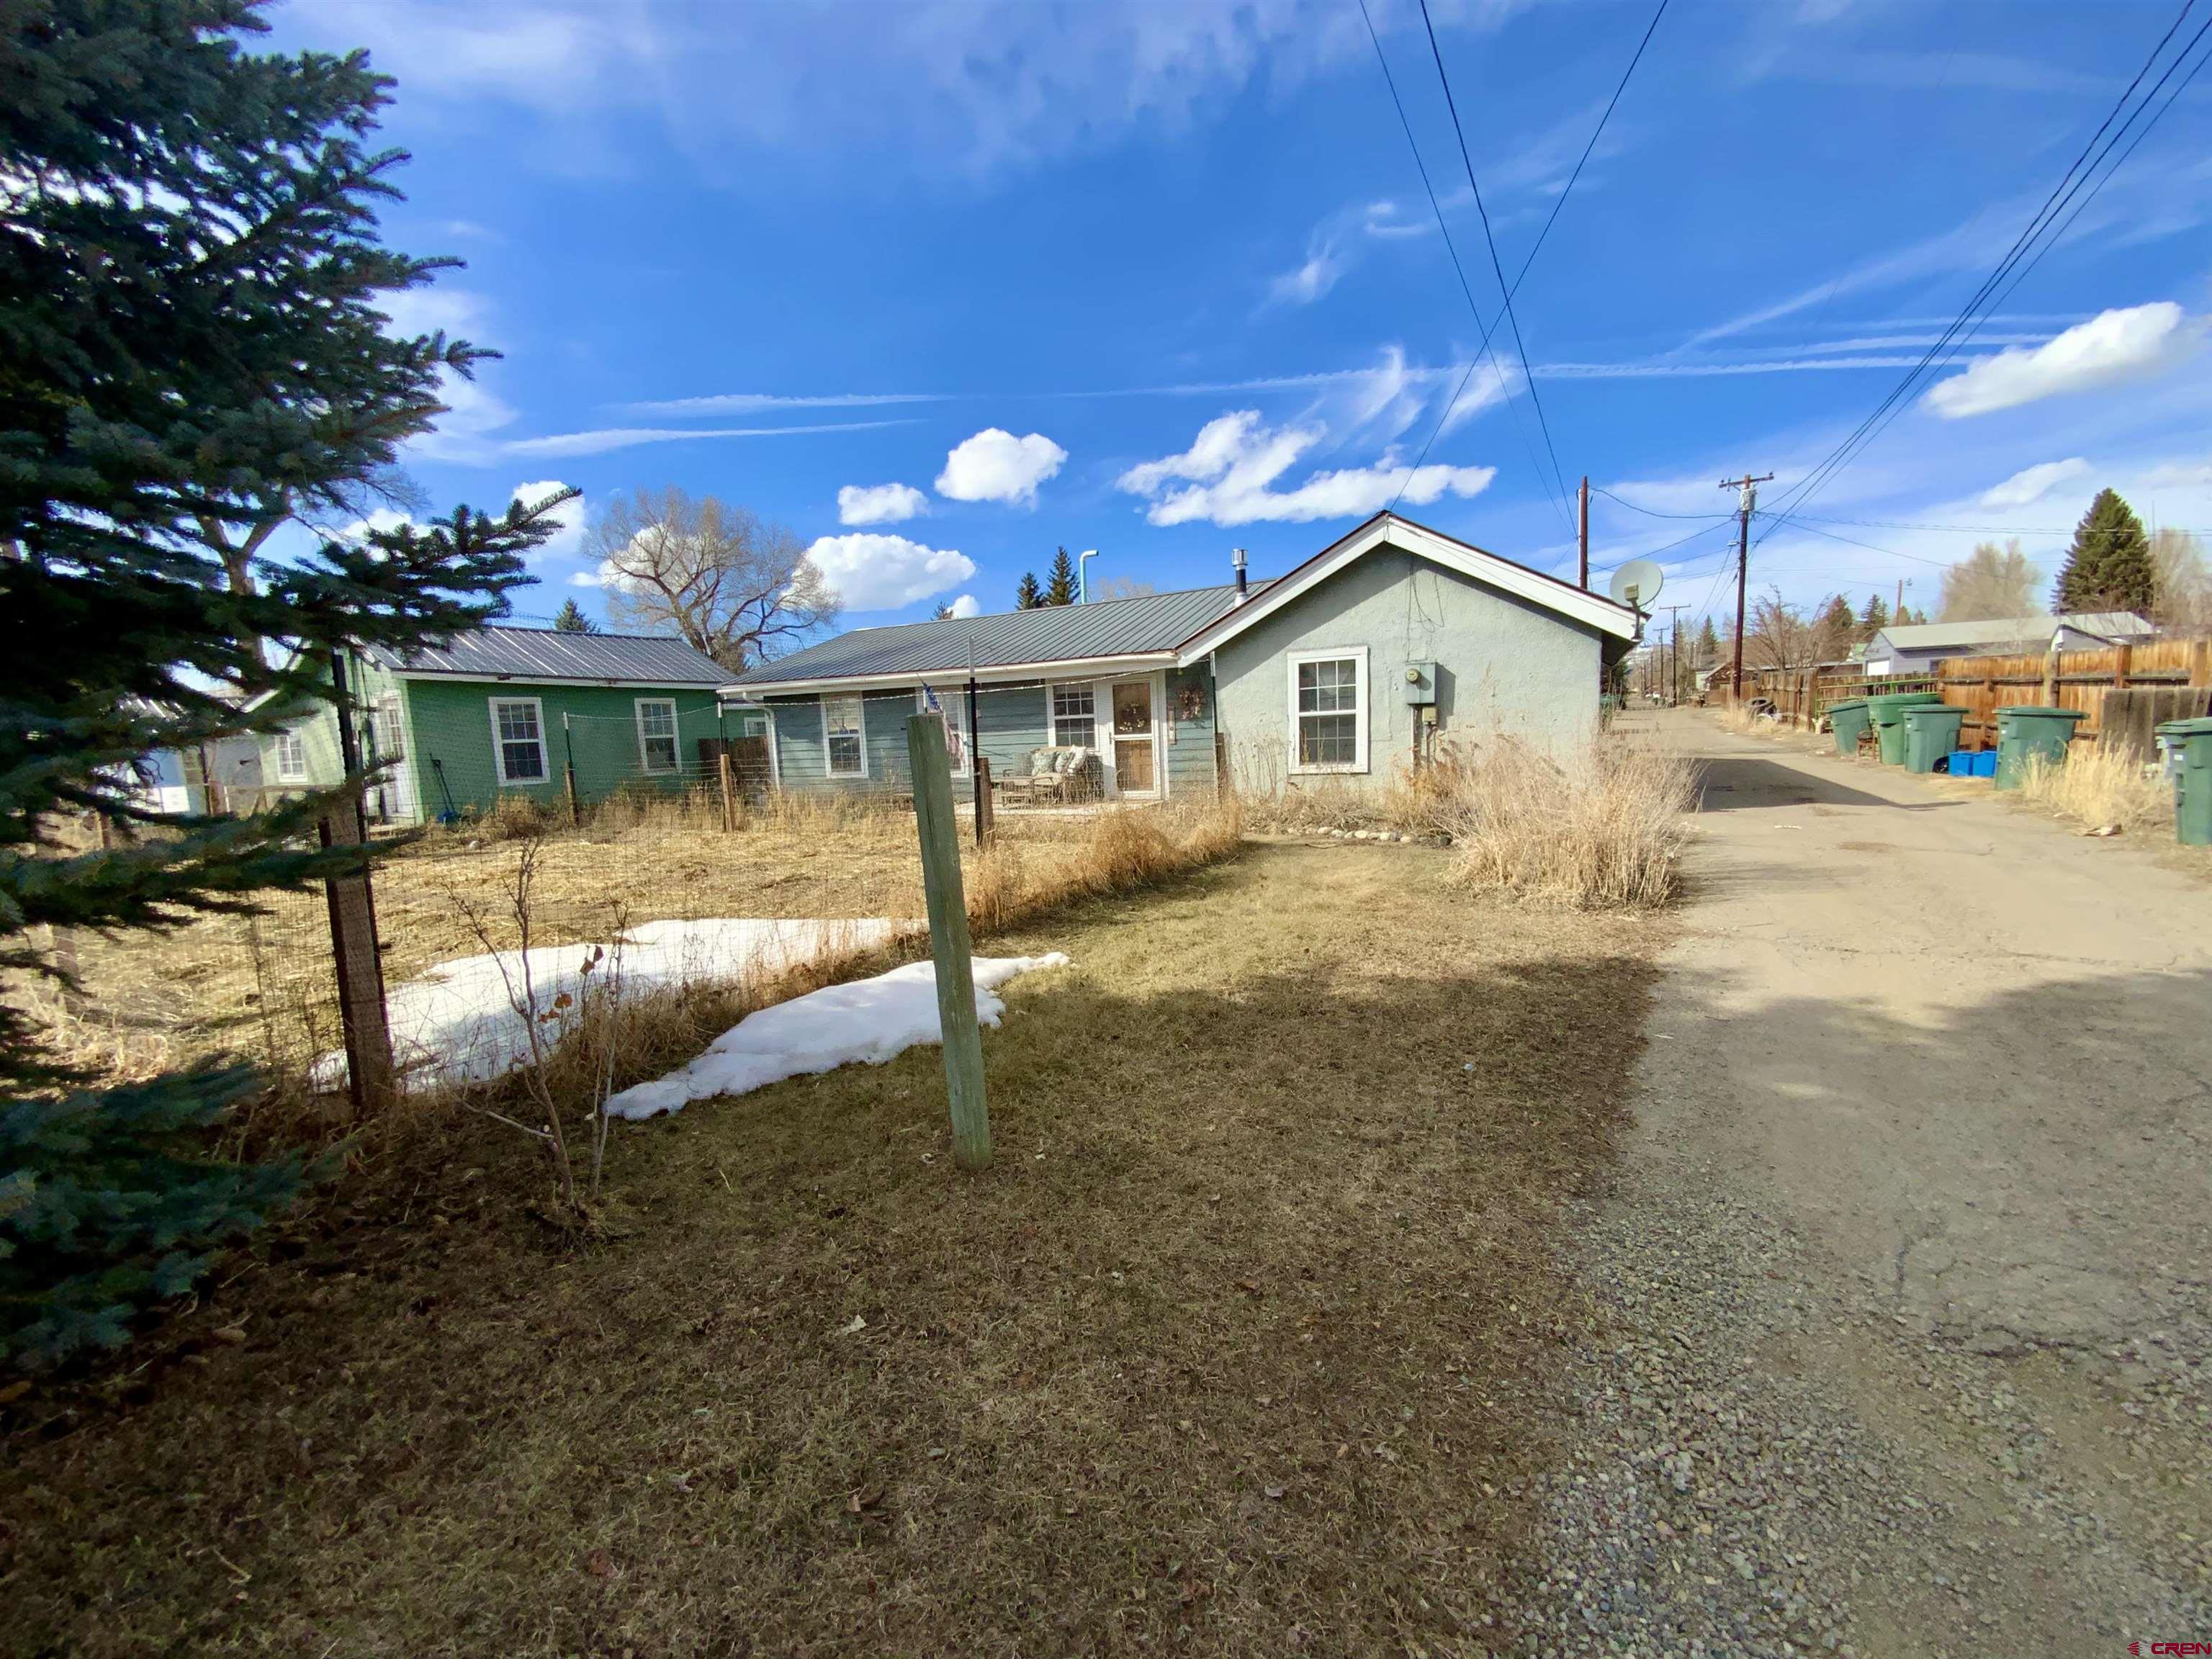 This is a great opportunity to own 4 rentals in the town of Gunnison!  The property has 2 studios, a 1 bedroom/1 bath house and a 2 bedroom/2 bath house. The 2 bedroom house has a detached garage with workshop space. Property features a community garden for all the units.  Location is close to the High school and Elementary schools and RTA bus stop. Property is partially fenced for pets. Tenants are paying all utilities.